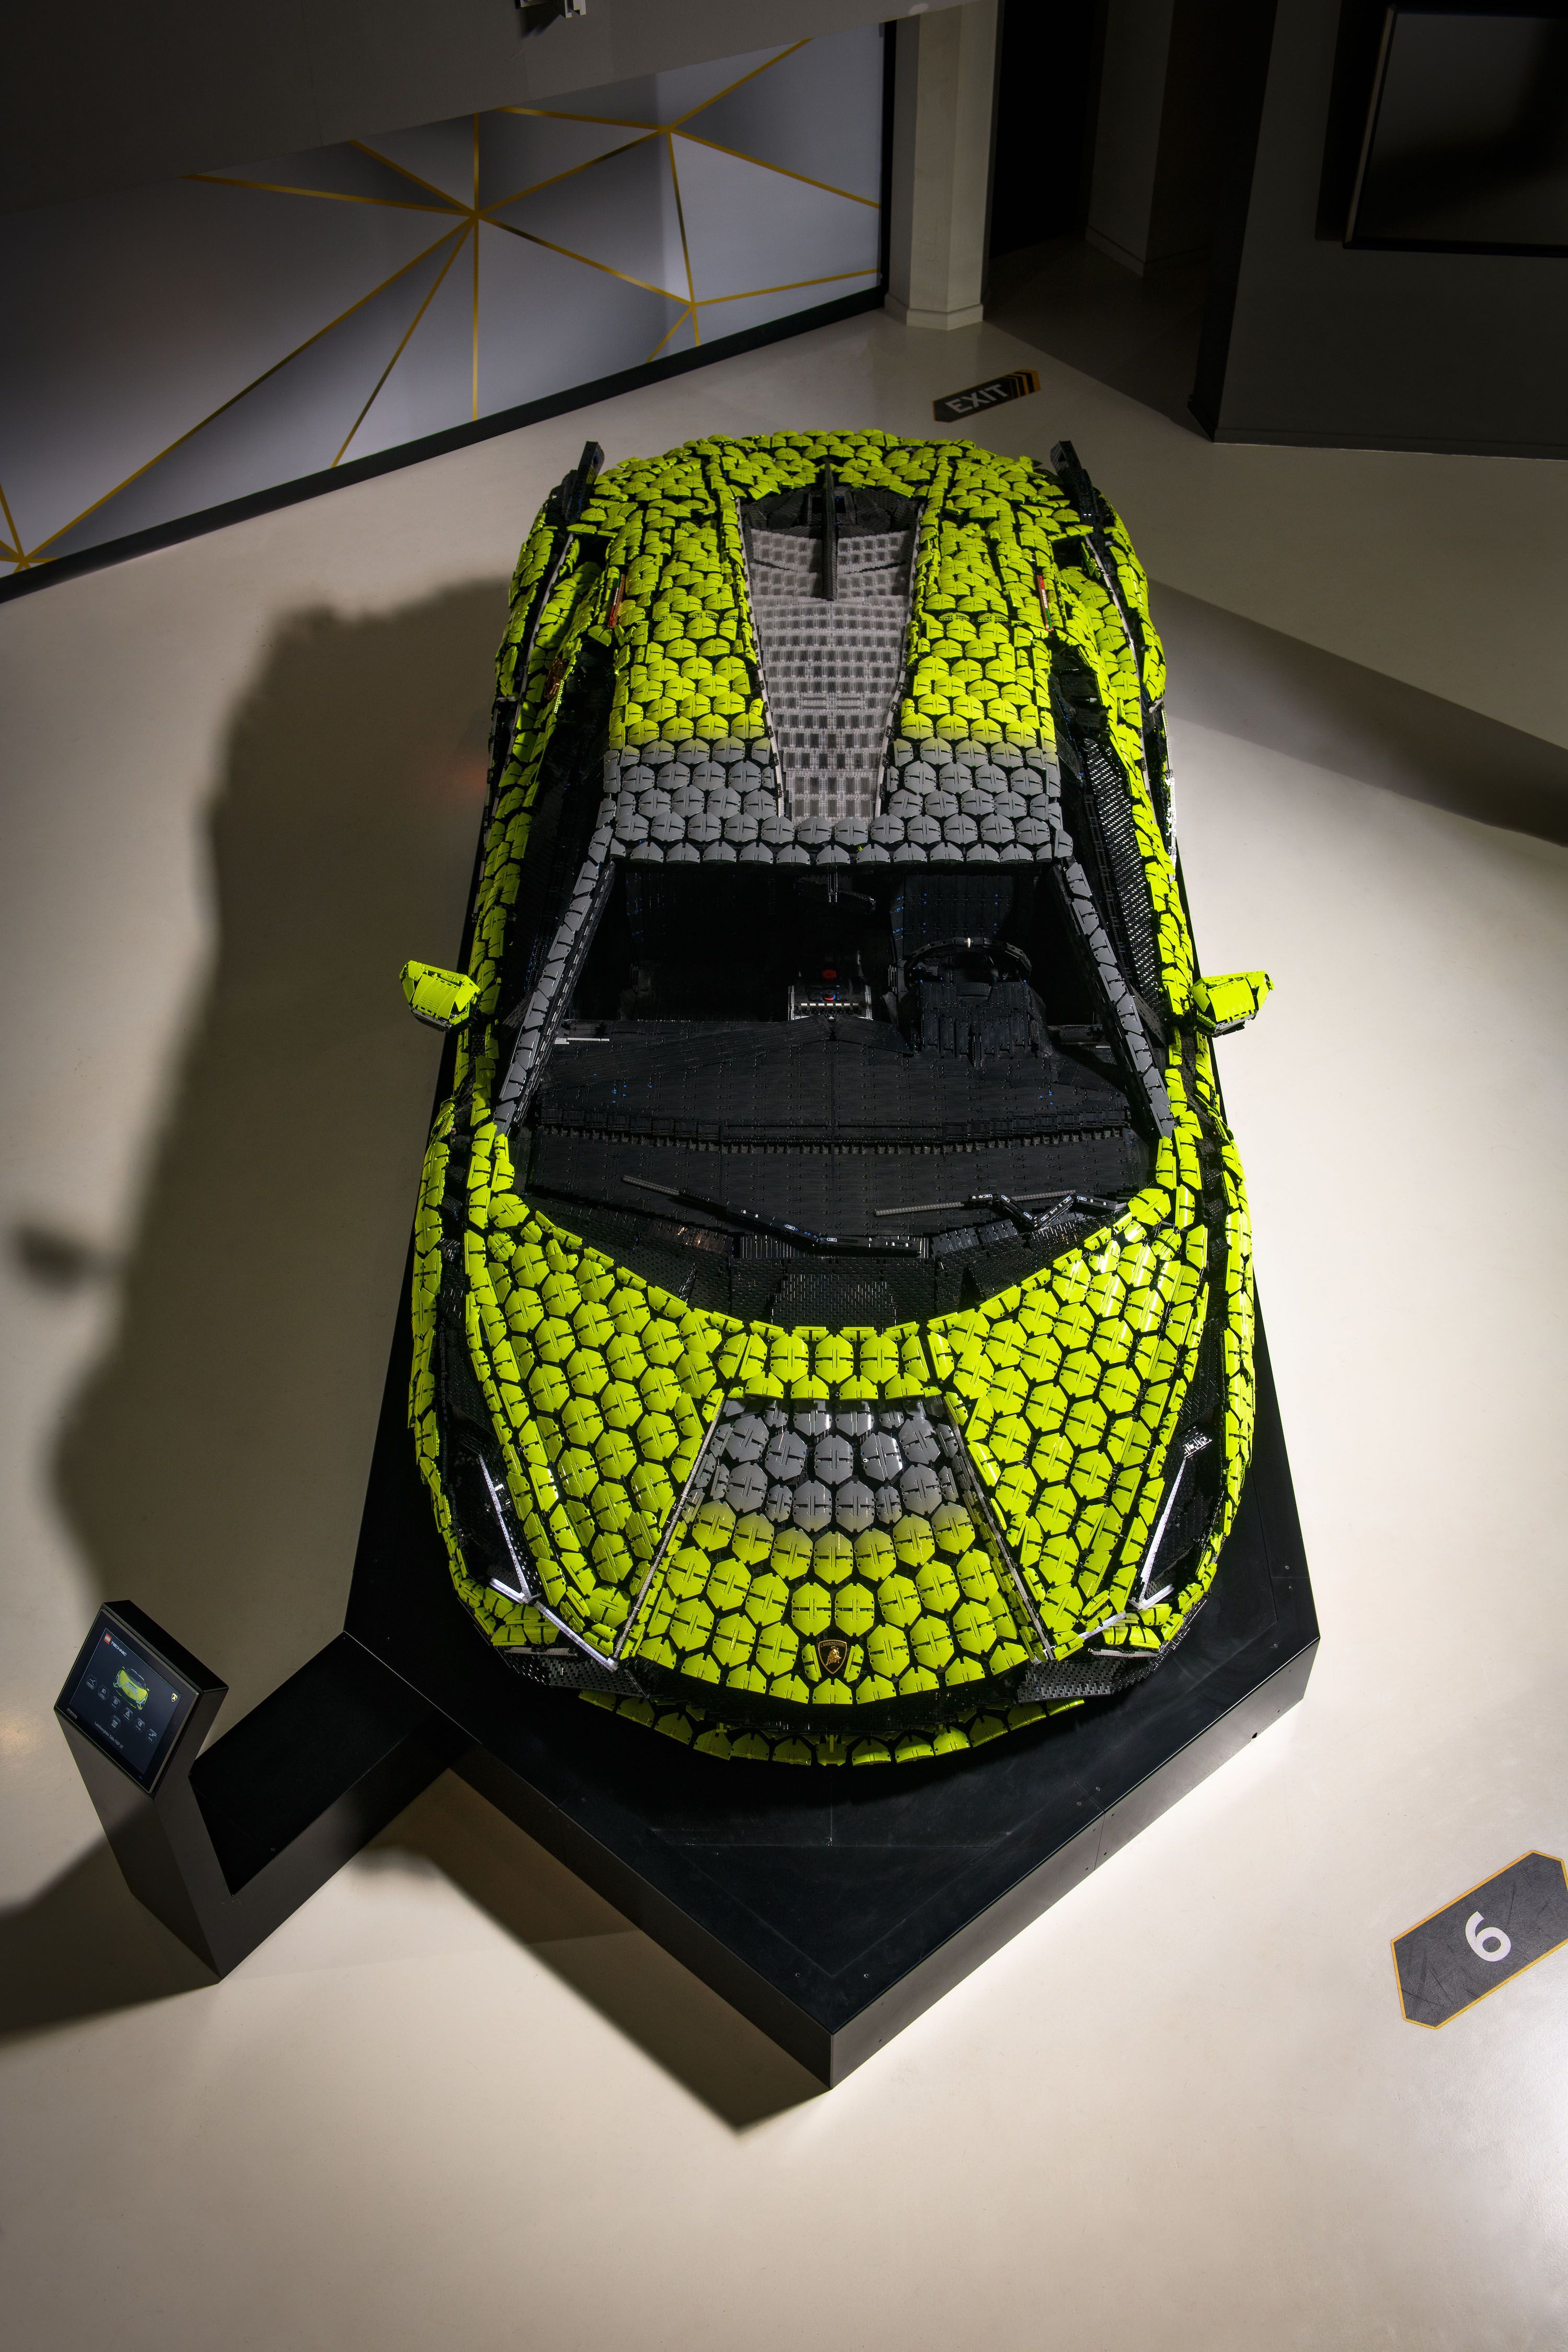 LEGO unveils life-size Lamborghini Sián FKP 37 built with over 400,000  pieces [News] - The Brothers Brick